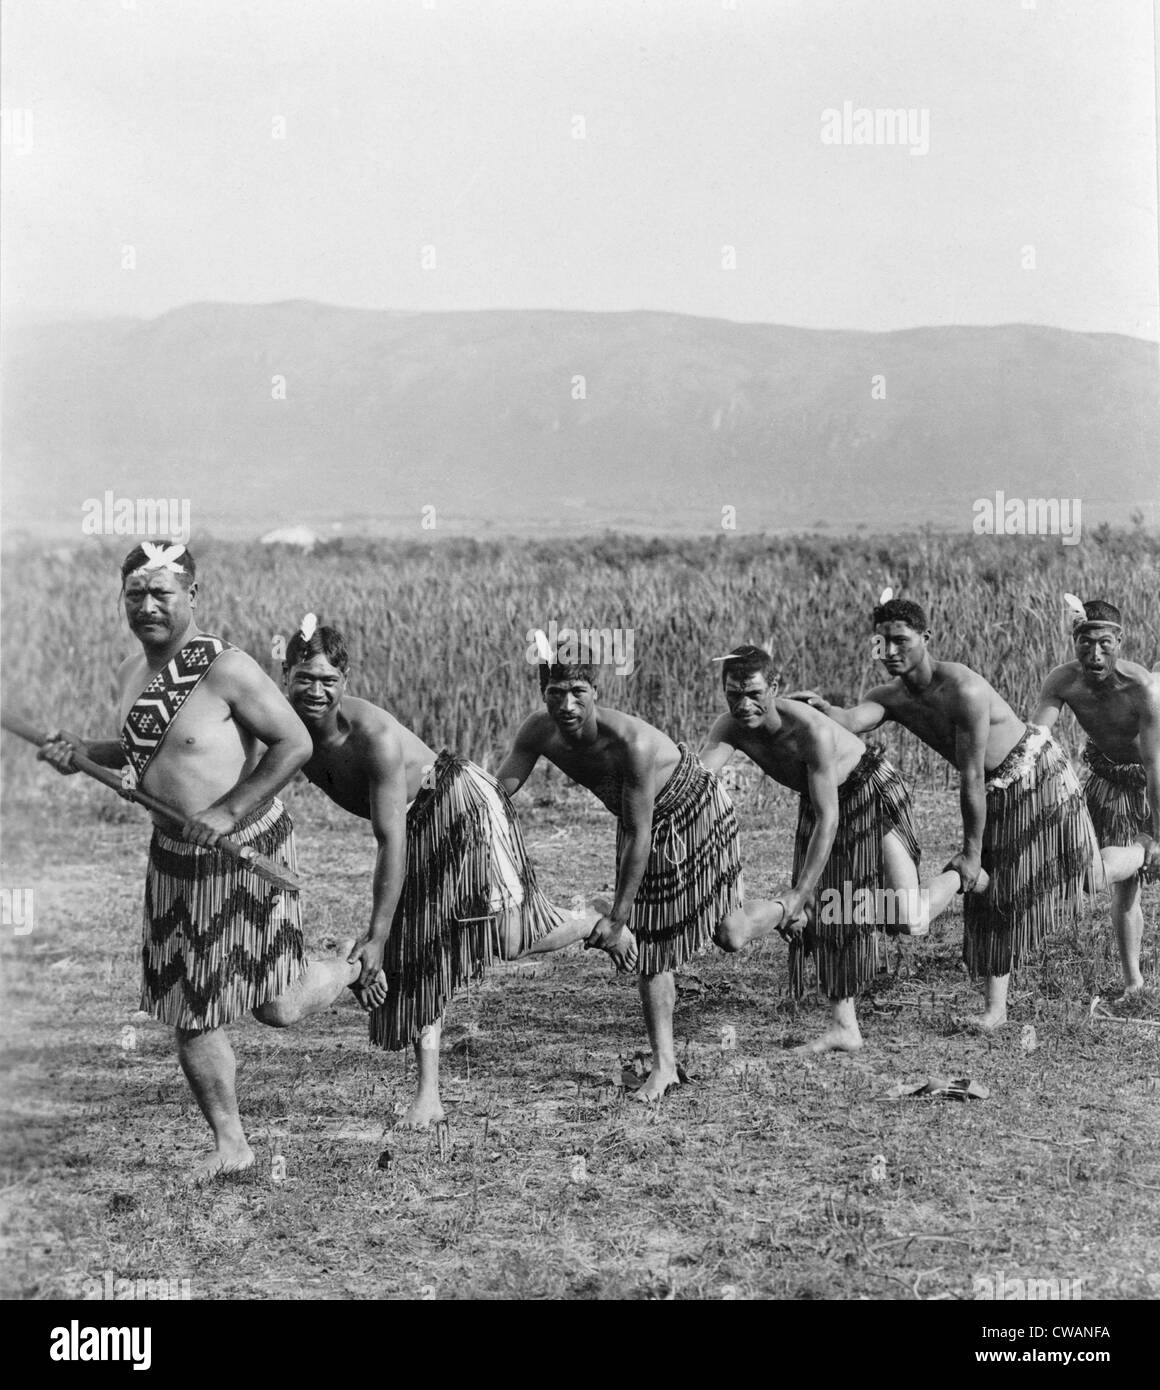 Five Maori men posing in traditional clothing doing haka dance. The dance of the New Zealand natives employs facial distortions Stock Photo